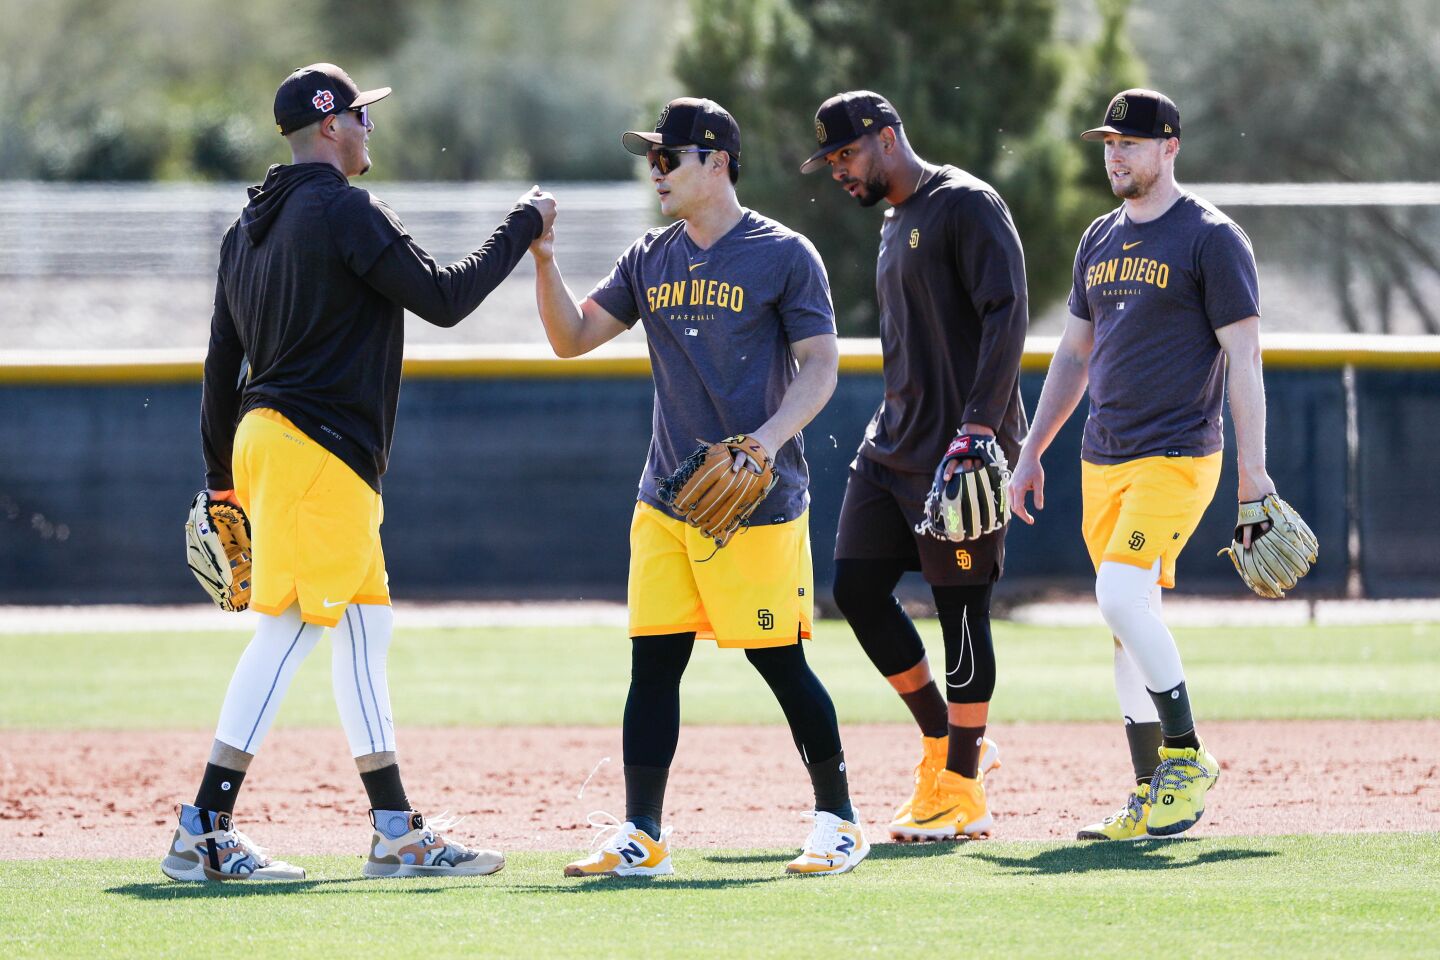 Padres third baseman Manny Machado high fives Ha-Seong Kim as they walk off the field with Xander Bogaerts and Jake Cronenworth during a spring training practice at Peoria Sports Complex on Thursday.